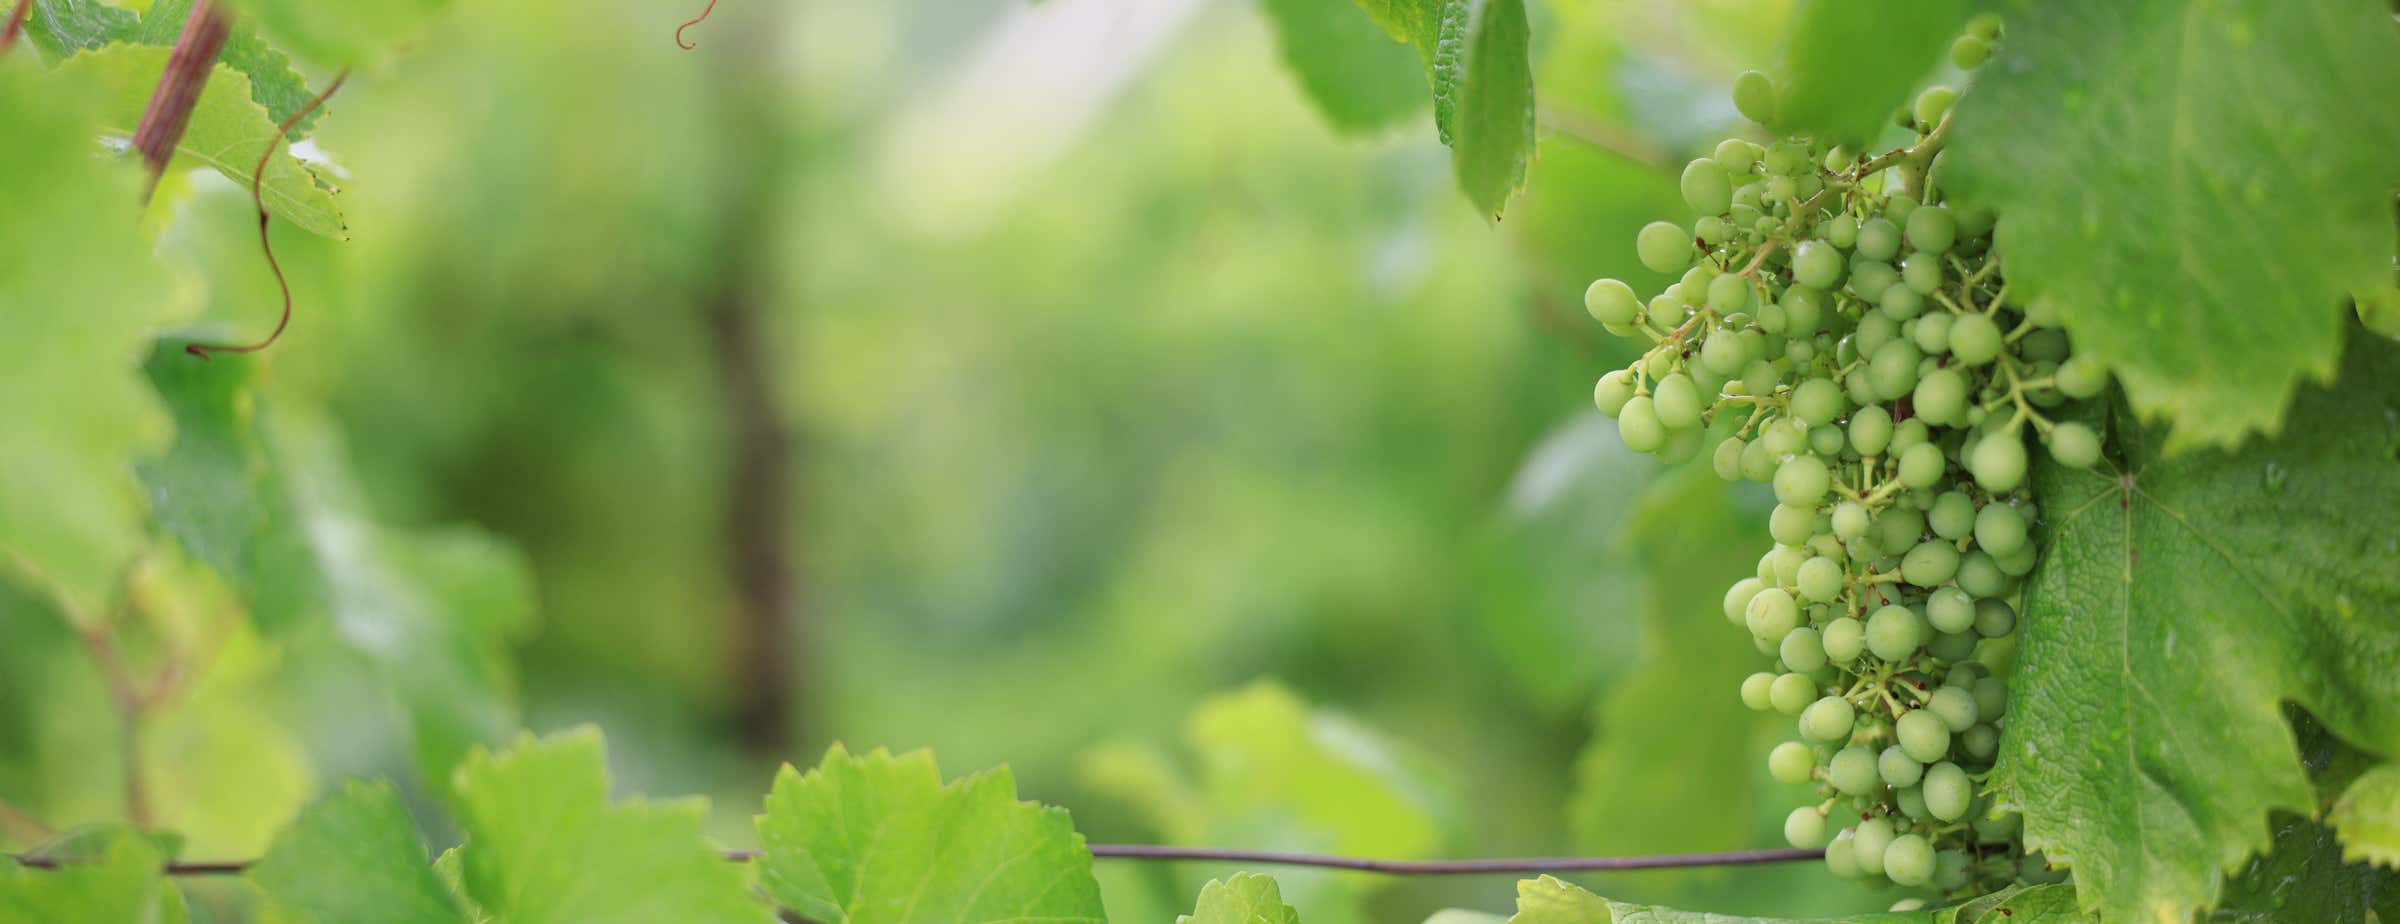 Picture of green grapes hanging in a vineyard surrounded by green leaves. 